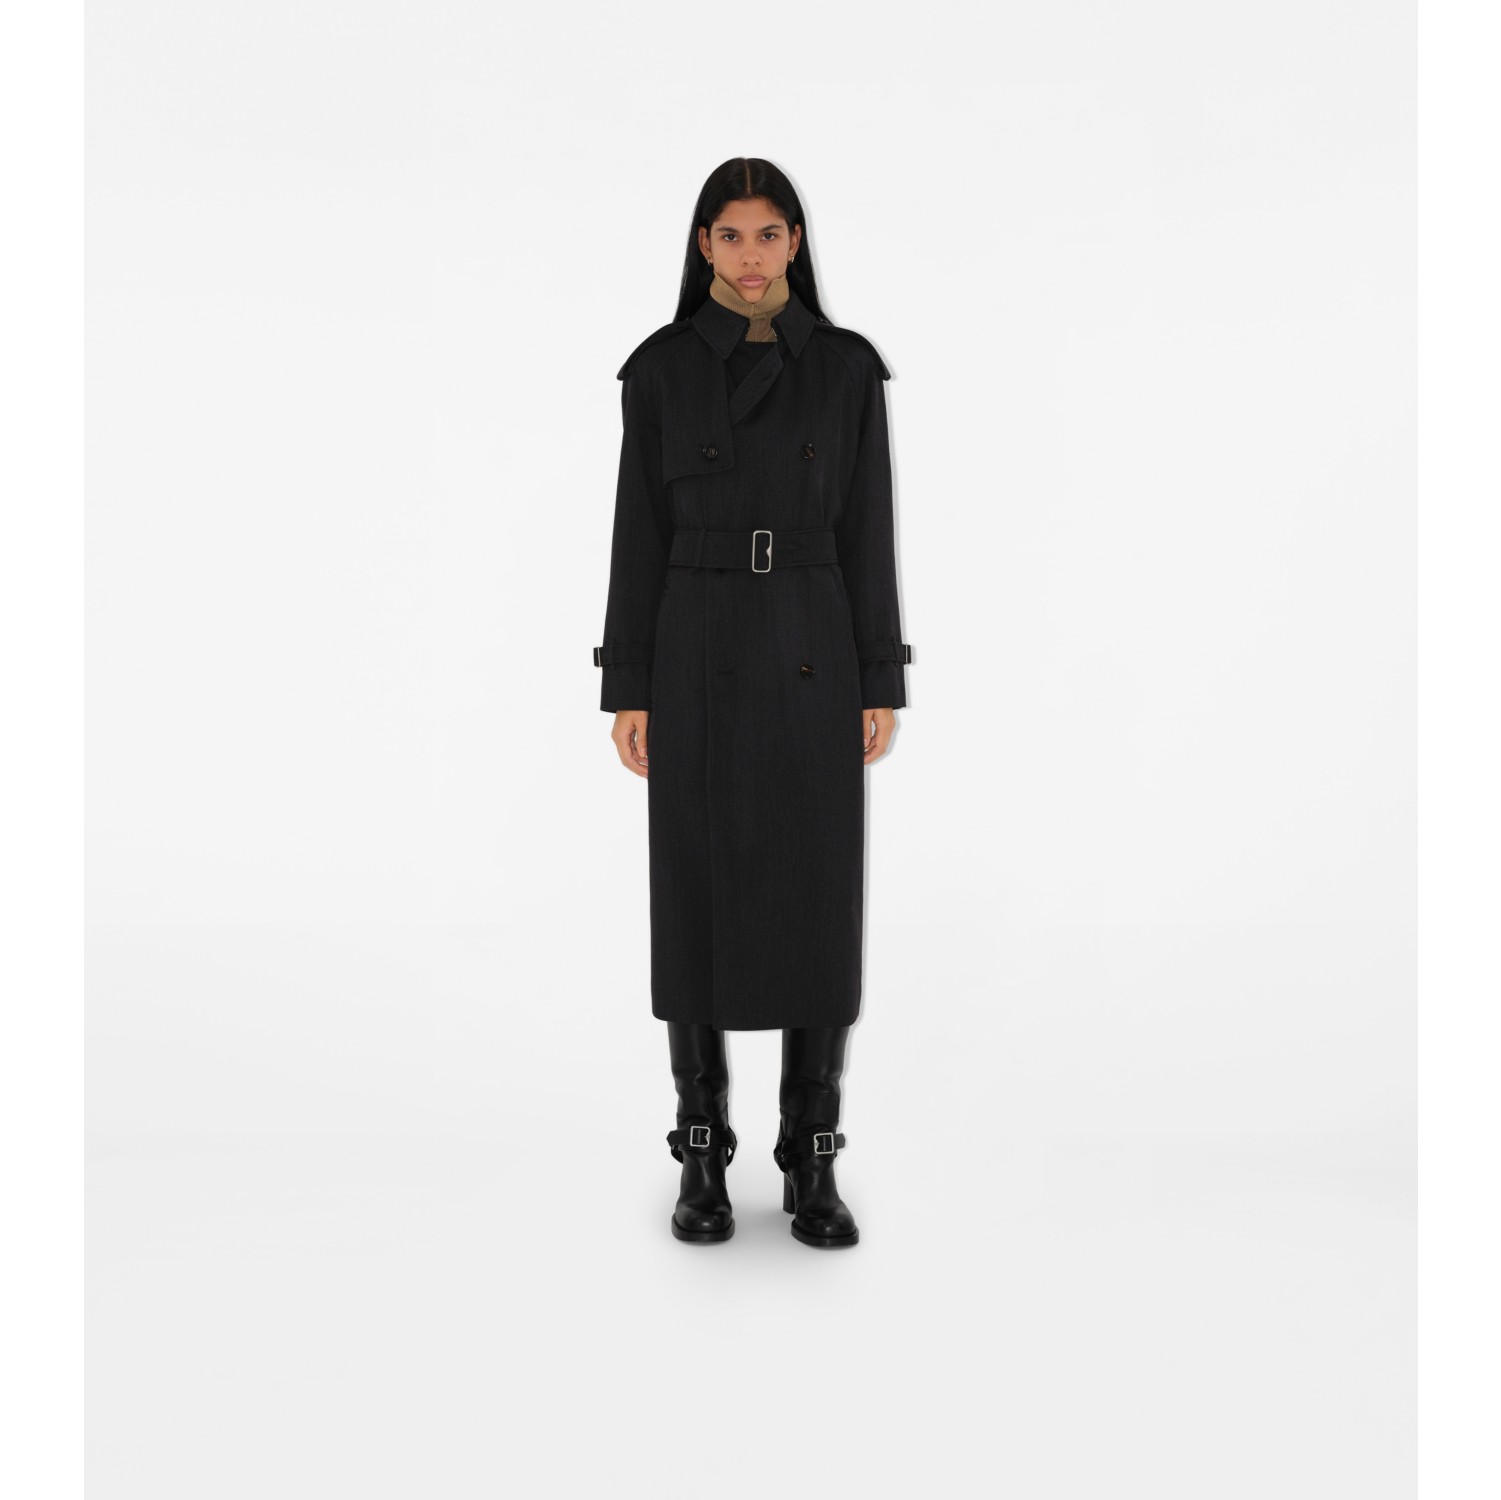 Langer Trenchcoat aus Wolle